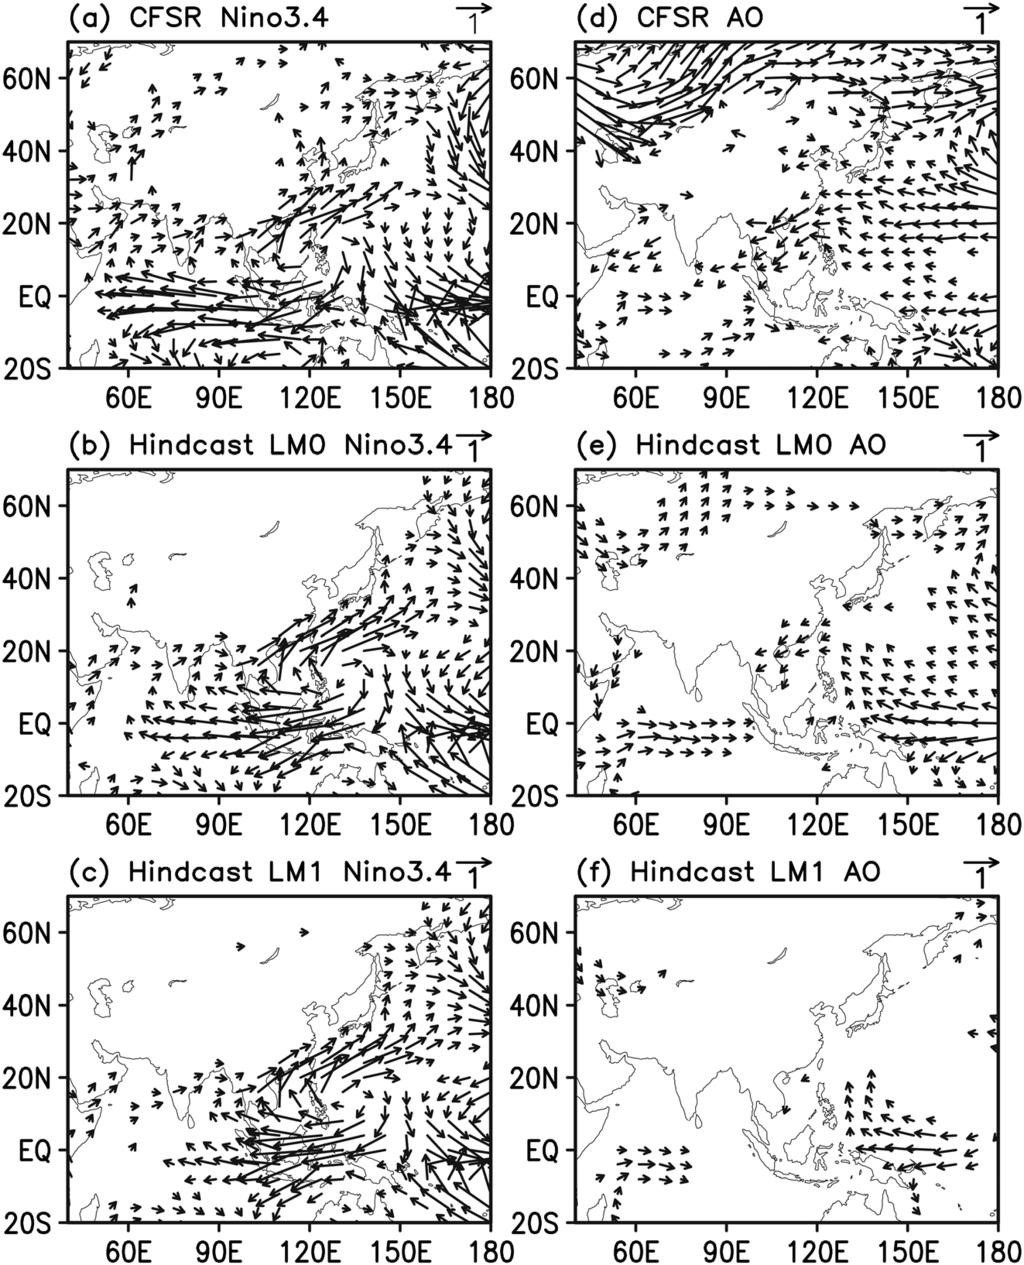 Figure 9. (a) Pattern of regression of CFSR 850 hpa winds (m s 1 ; vectors) against OI SST Niño3.4 and patterns of regression of hindcast 850 hpa winds against hindcast Niño3.